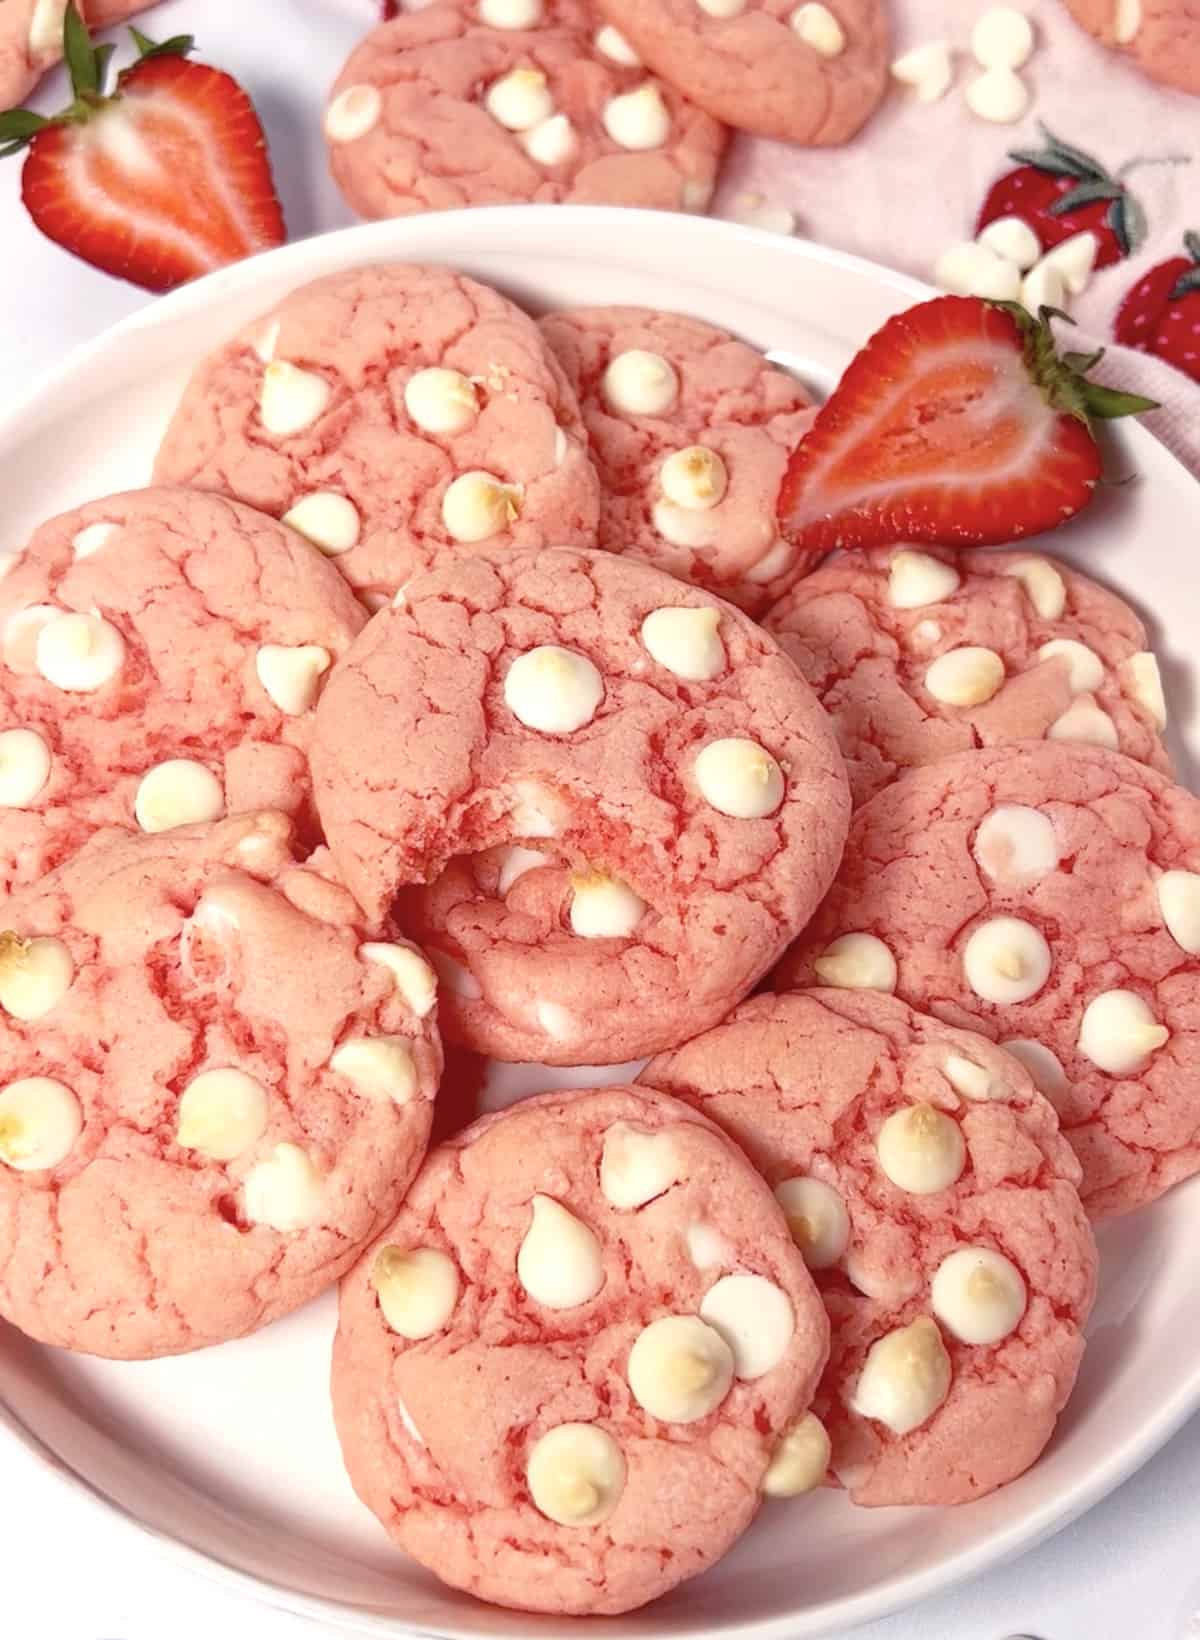 Big pile of pretty pink cake mix cookies on a plate with strawberries on the side.